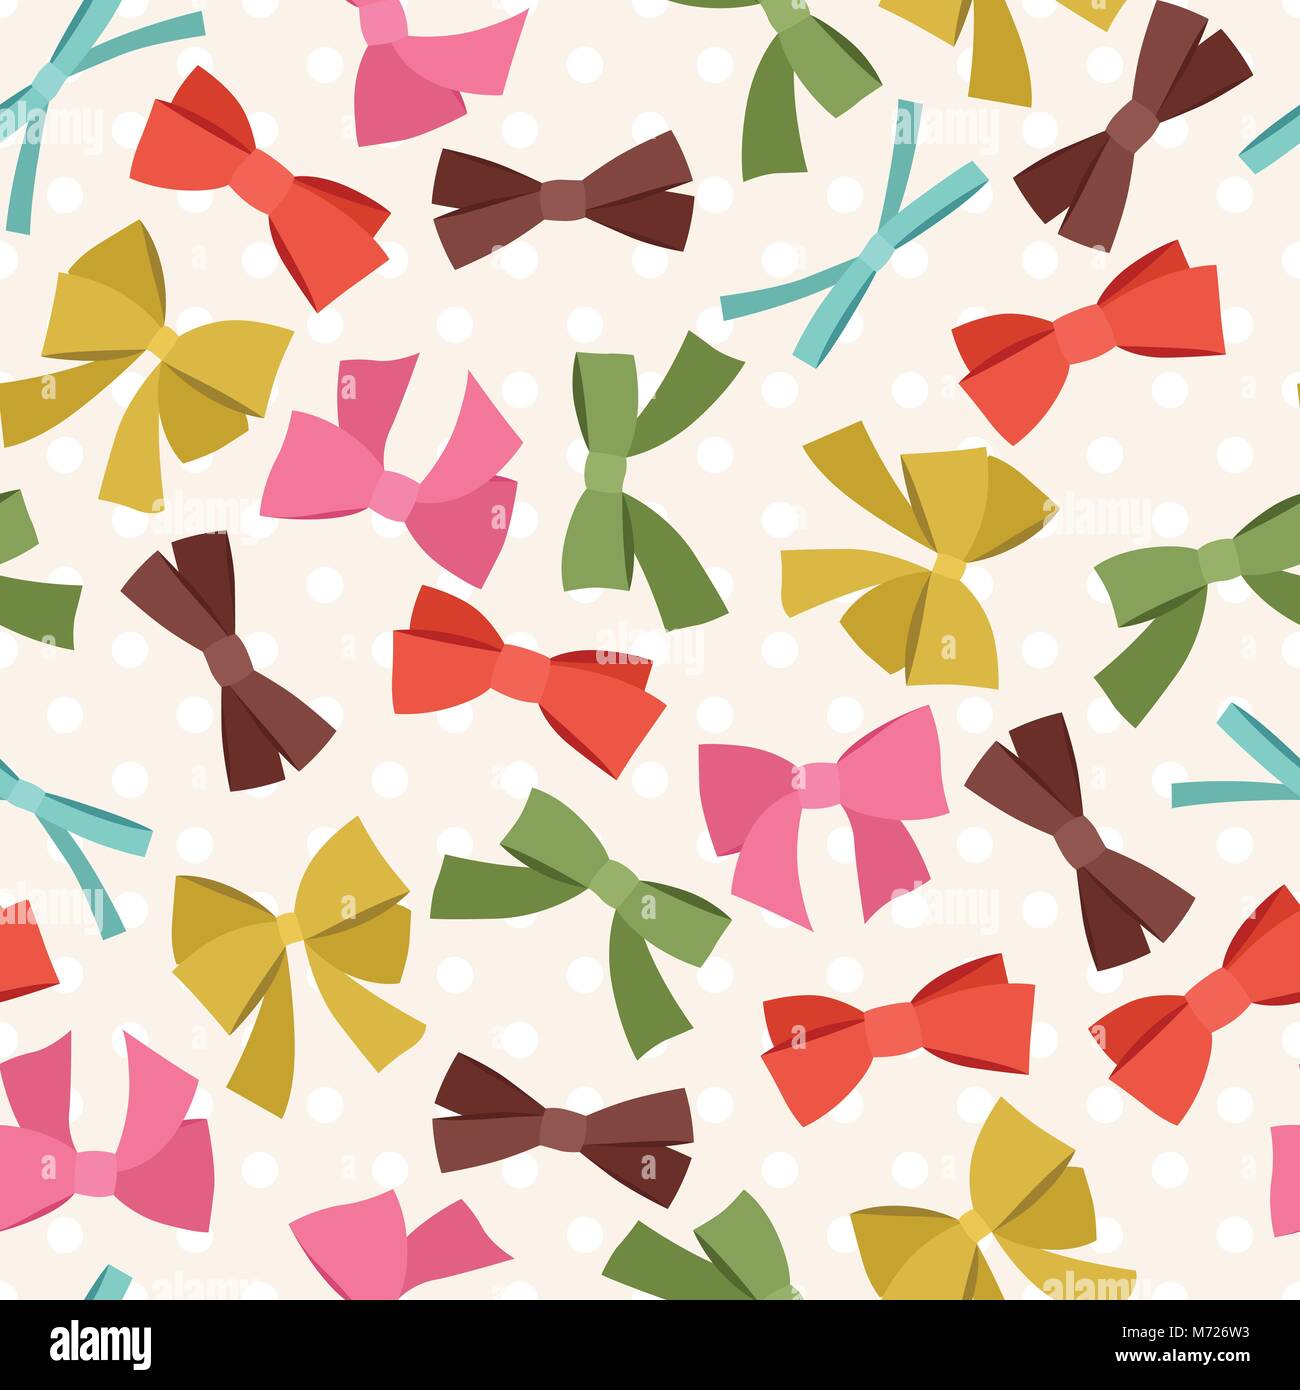 Seamless pattern with abstract various bows and ribbons Stock Vector